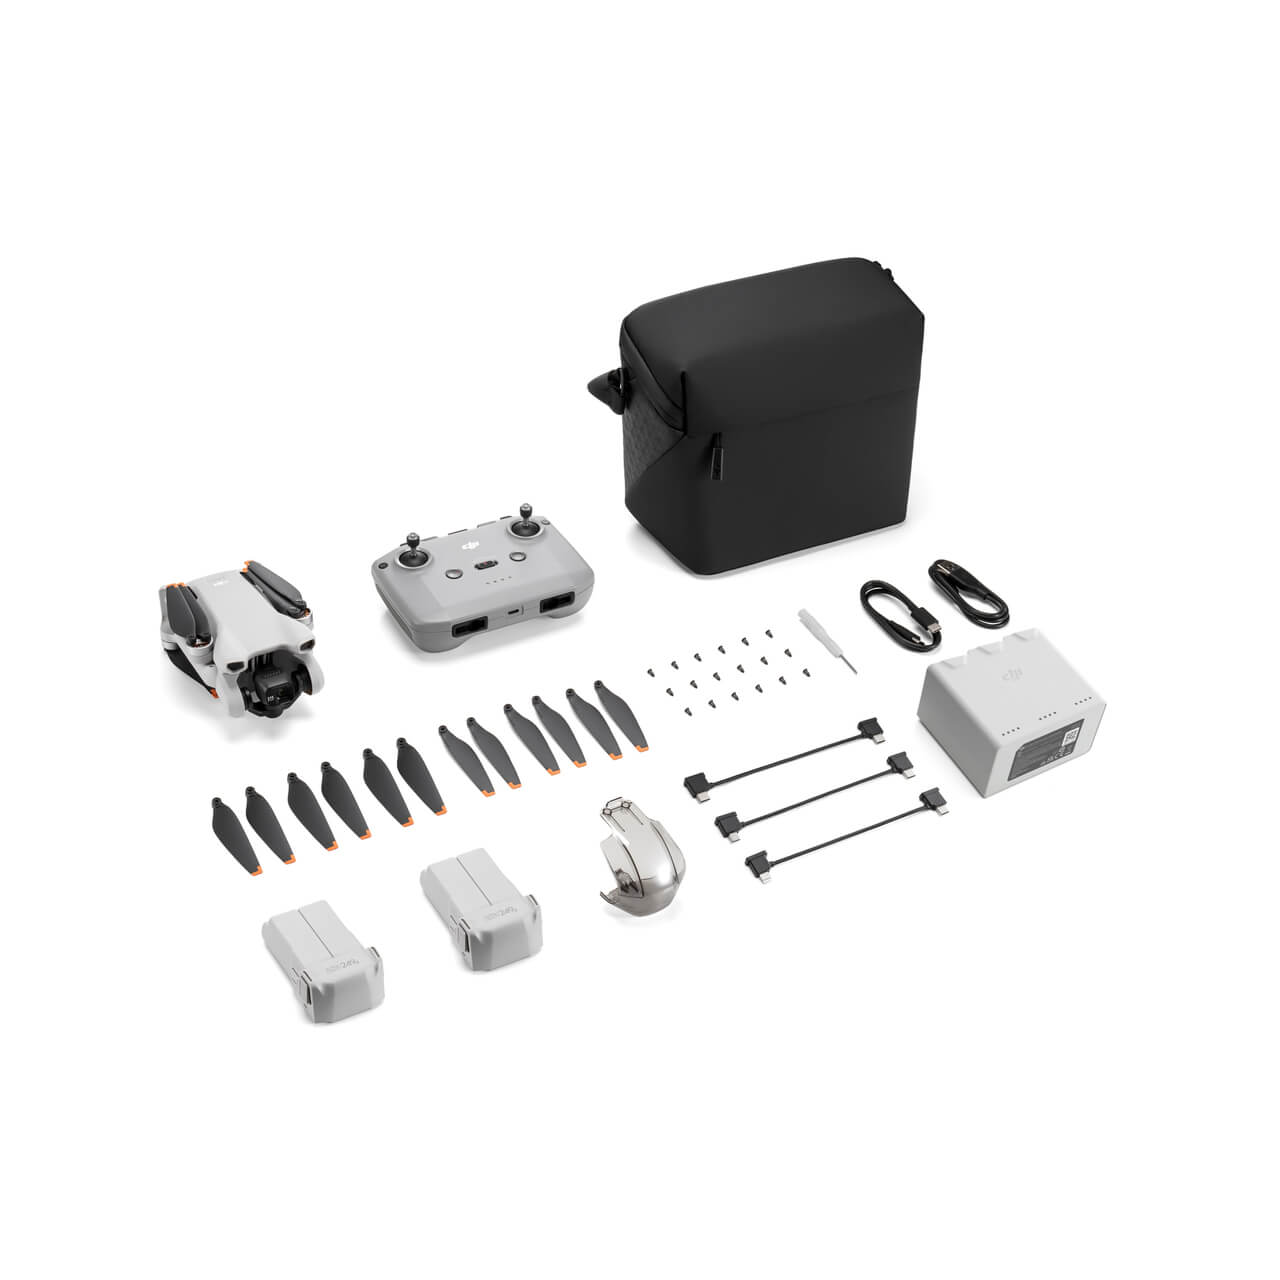 DJI Mini 3 Fly More Combo (Remote Controller Without Screen)